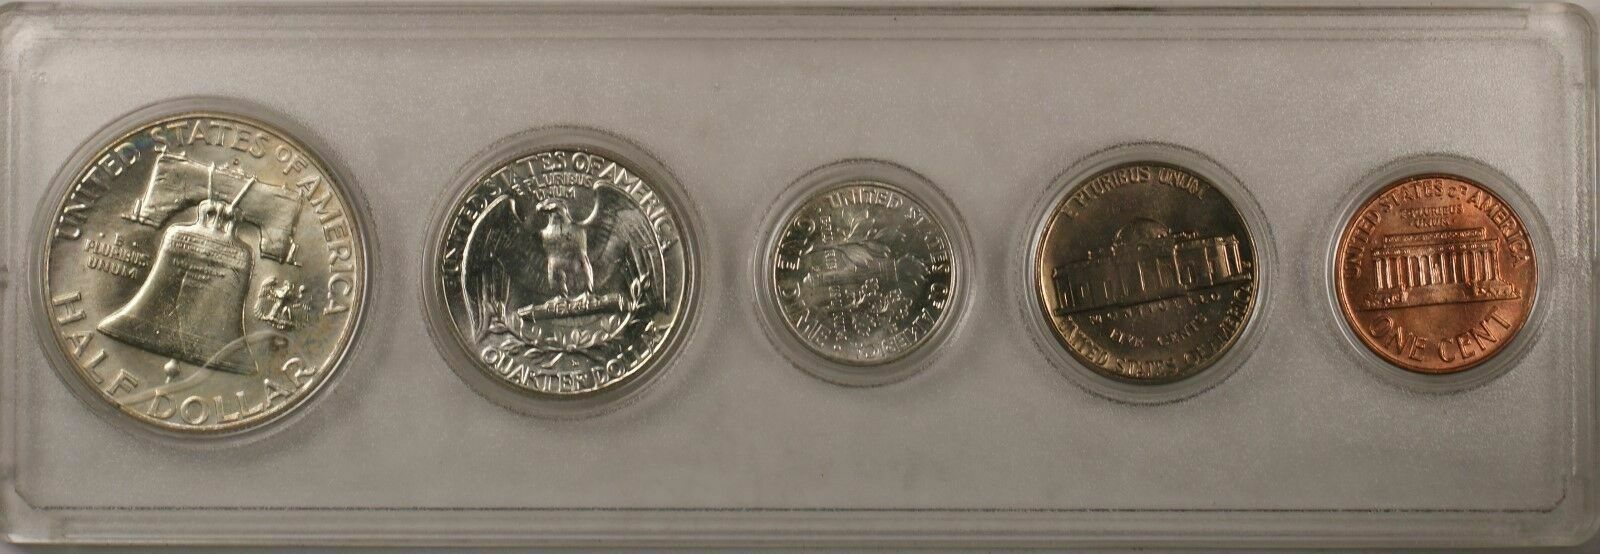 1963 D US Uncirculated Year Set with Silver Half Quarter and Dime 5 Coins Total